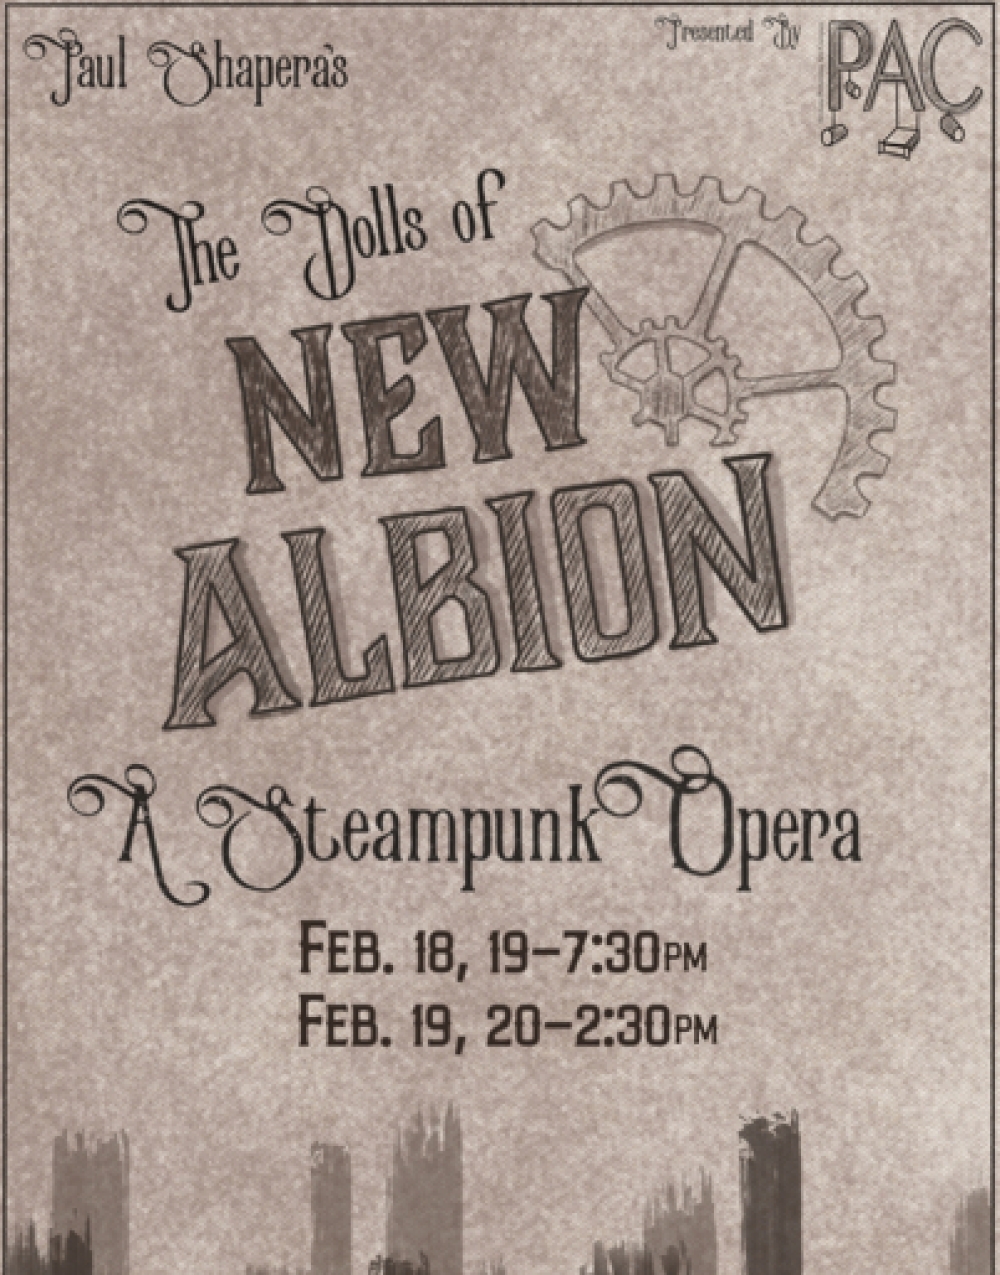 The Dolls of New Albion: A Steampunk Opera - Performing Arts Company Stage Mag